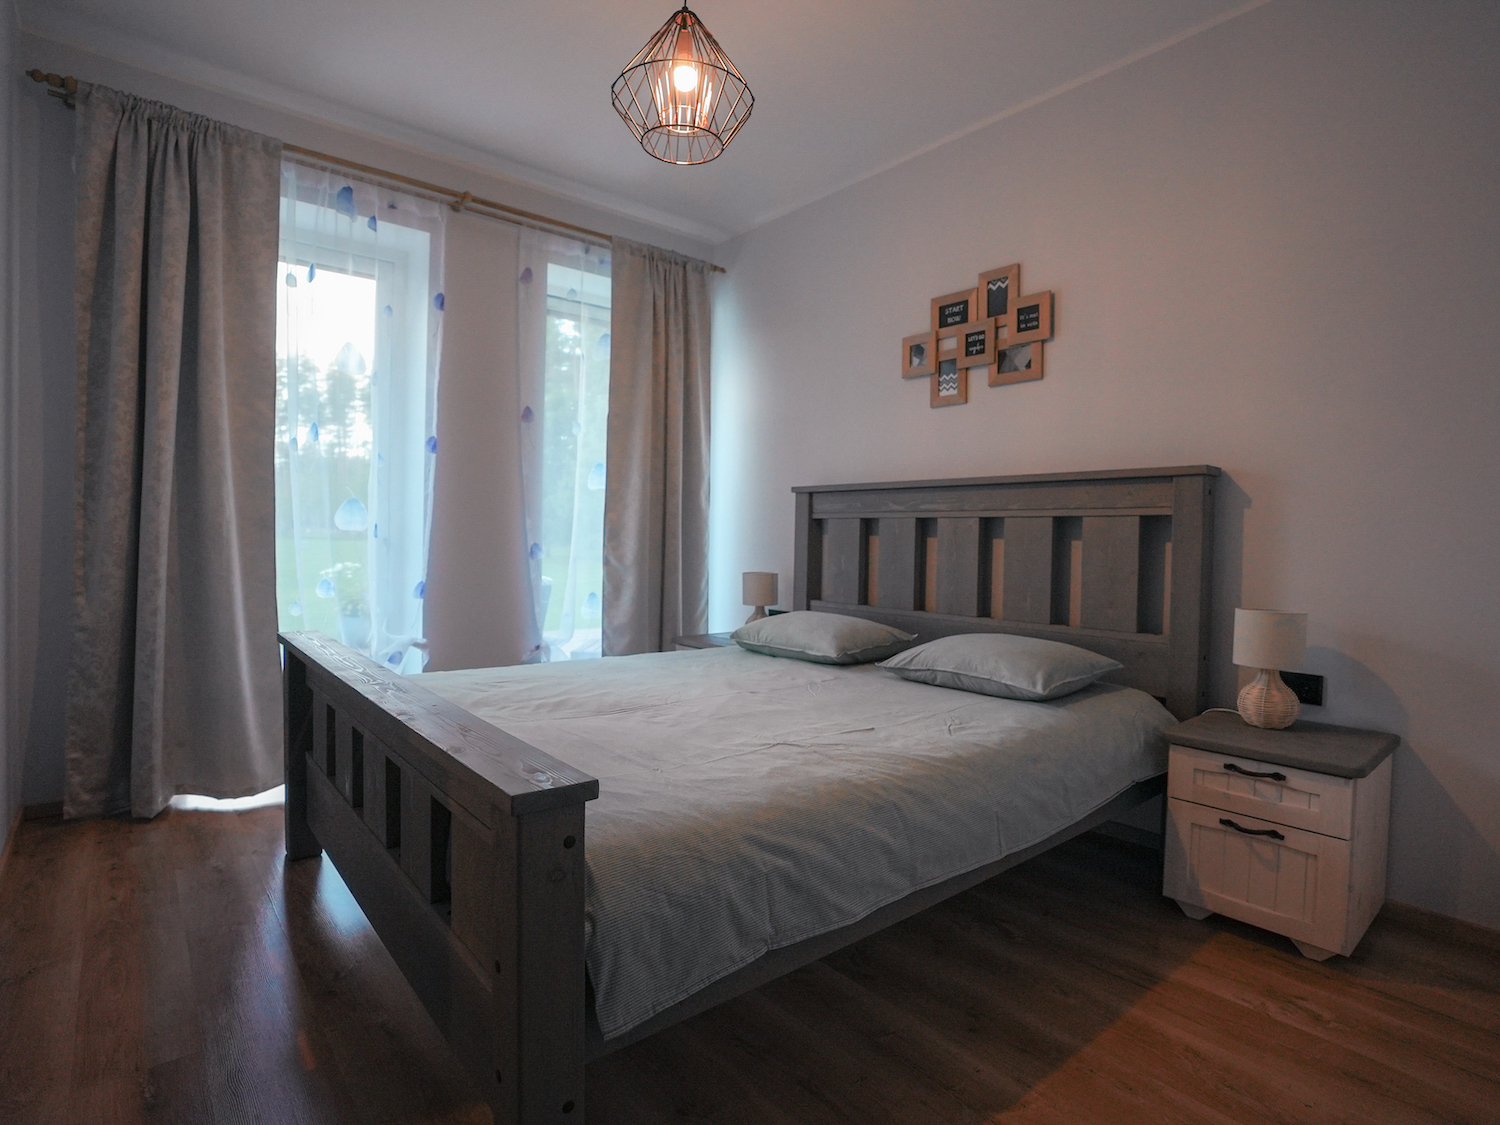 Luxury accommodation at The Peaceful Vacation guesthouse in Saaremaa with multiple bedrooms, the best holiday homes in Estonia